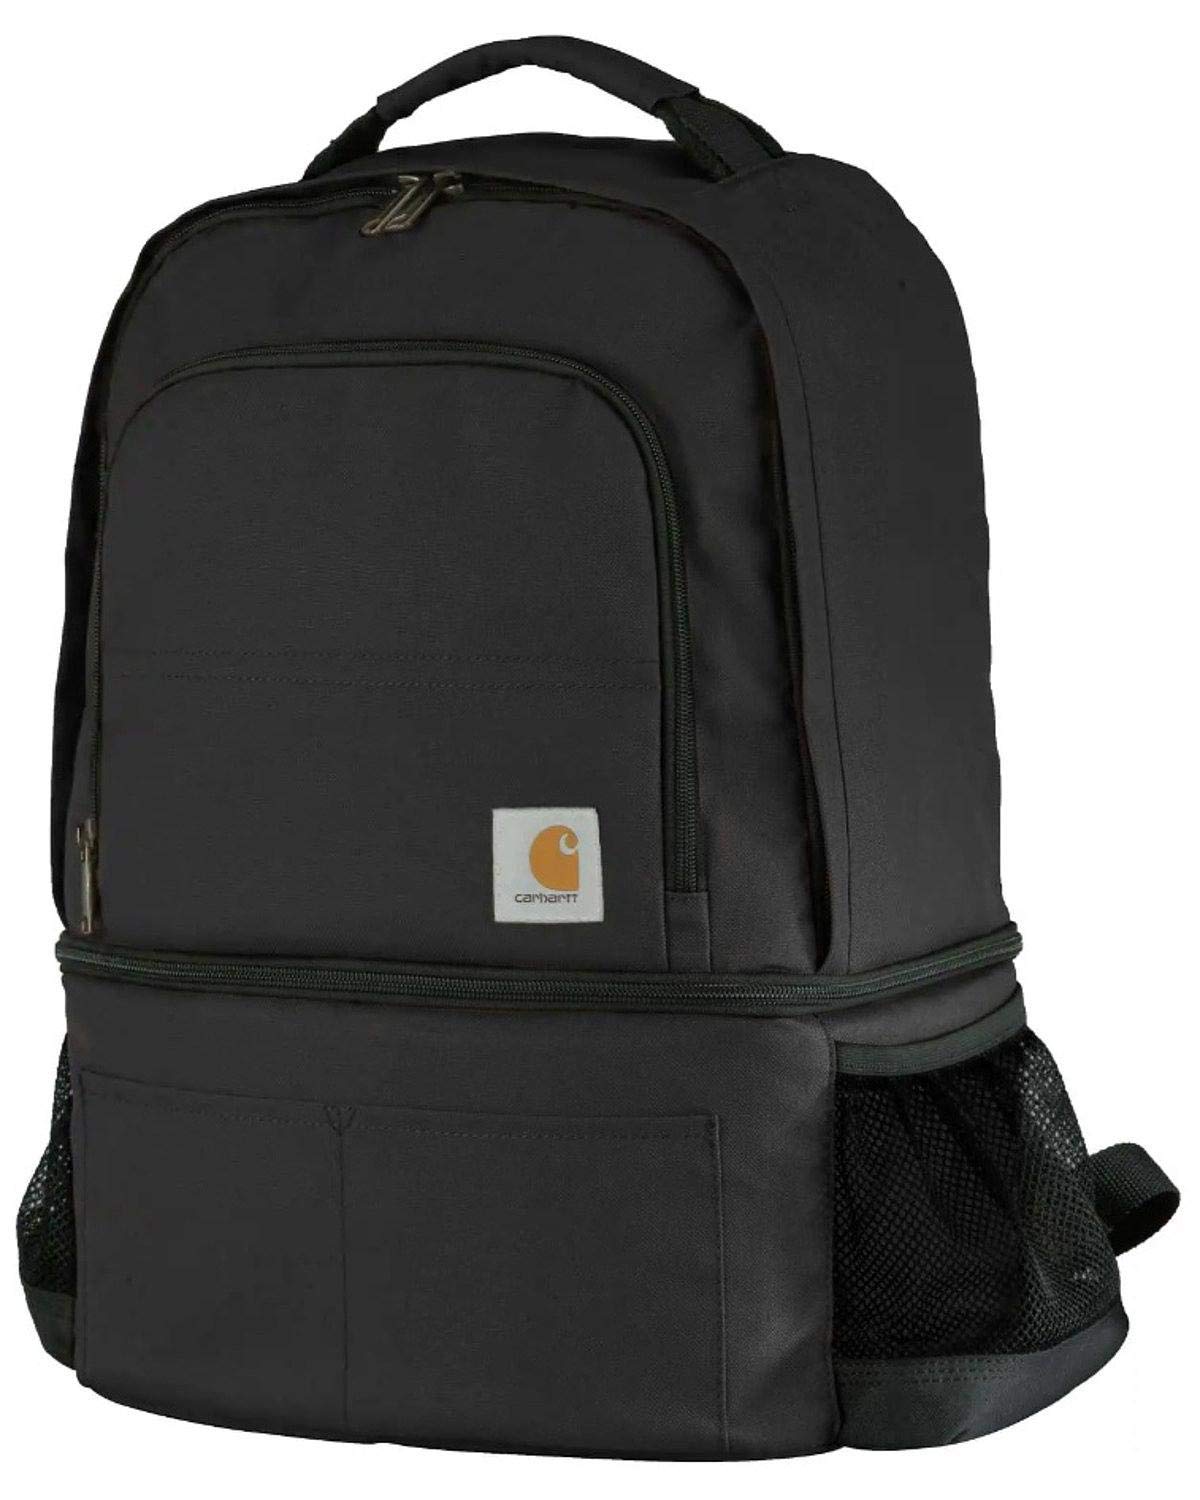  Carhartt Ripstop Messenger Bag, Durable Water-Resistant  Messenger Work Bag, Black : Clothing, Shoes & Jewelry